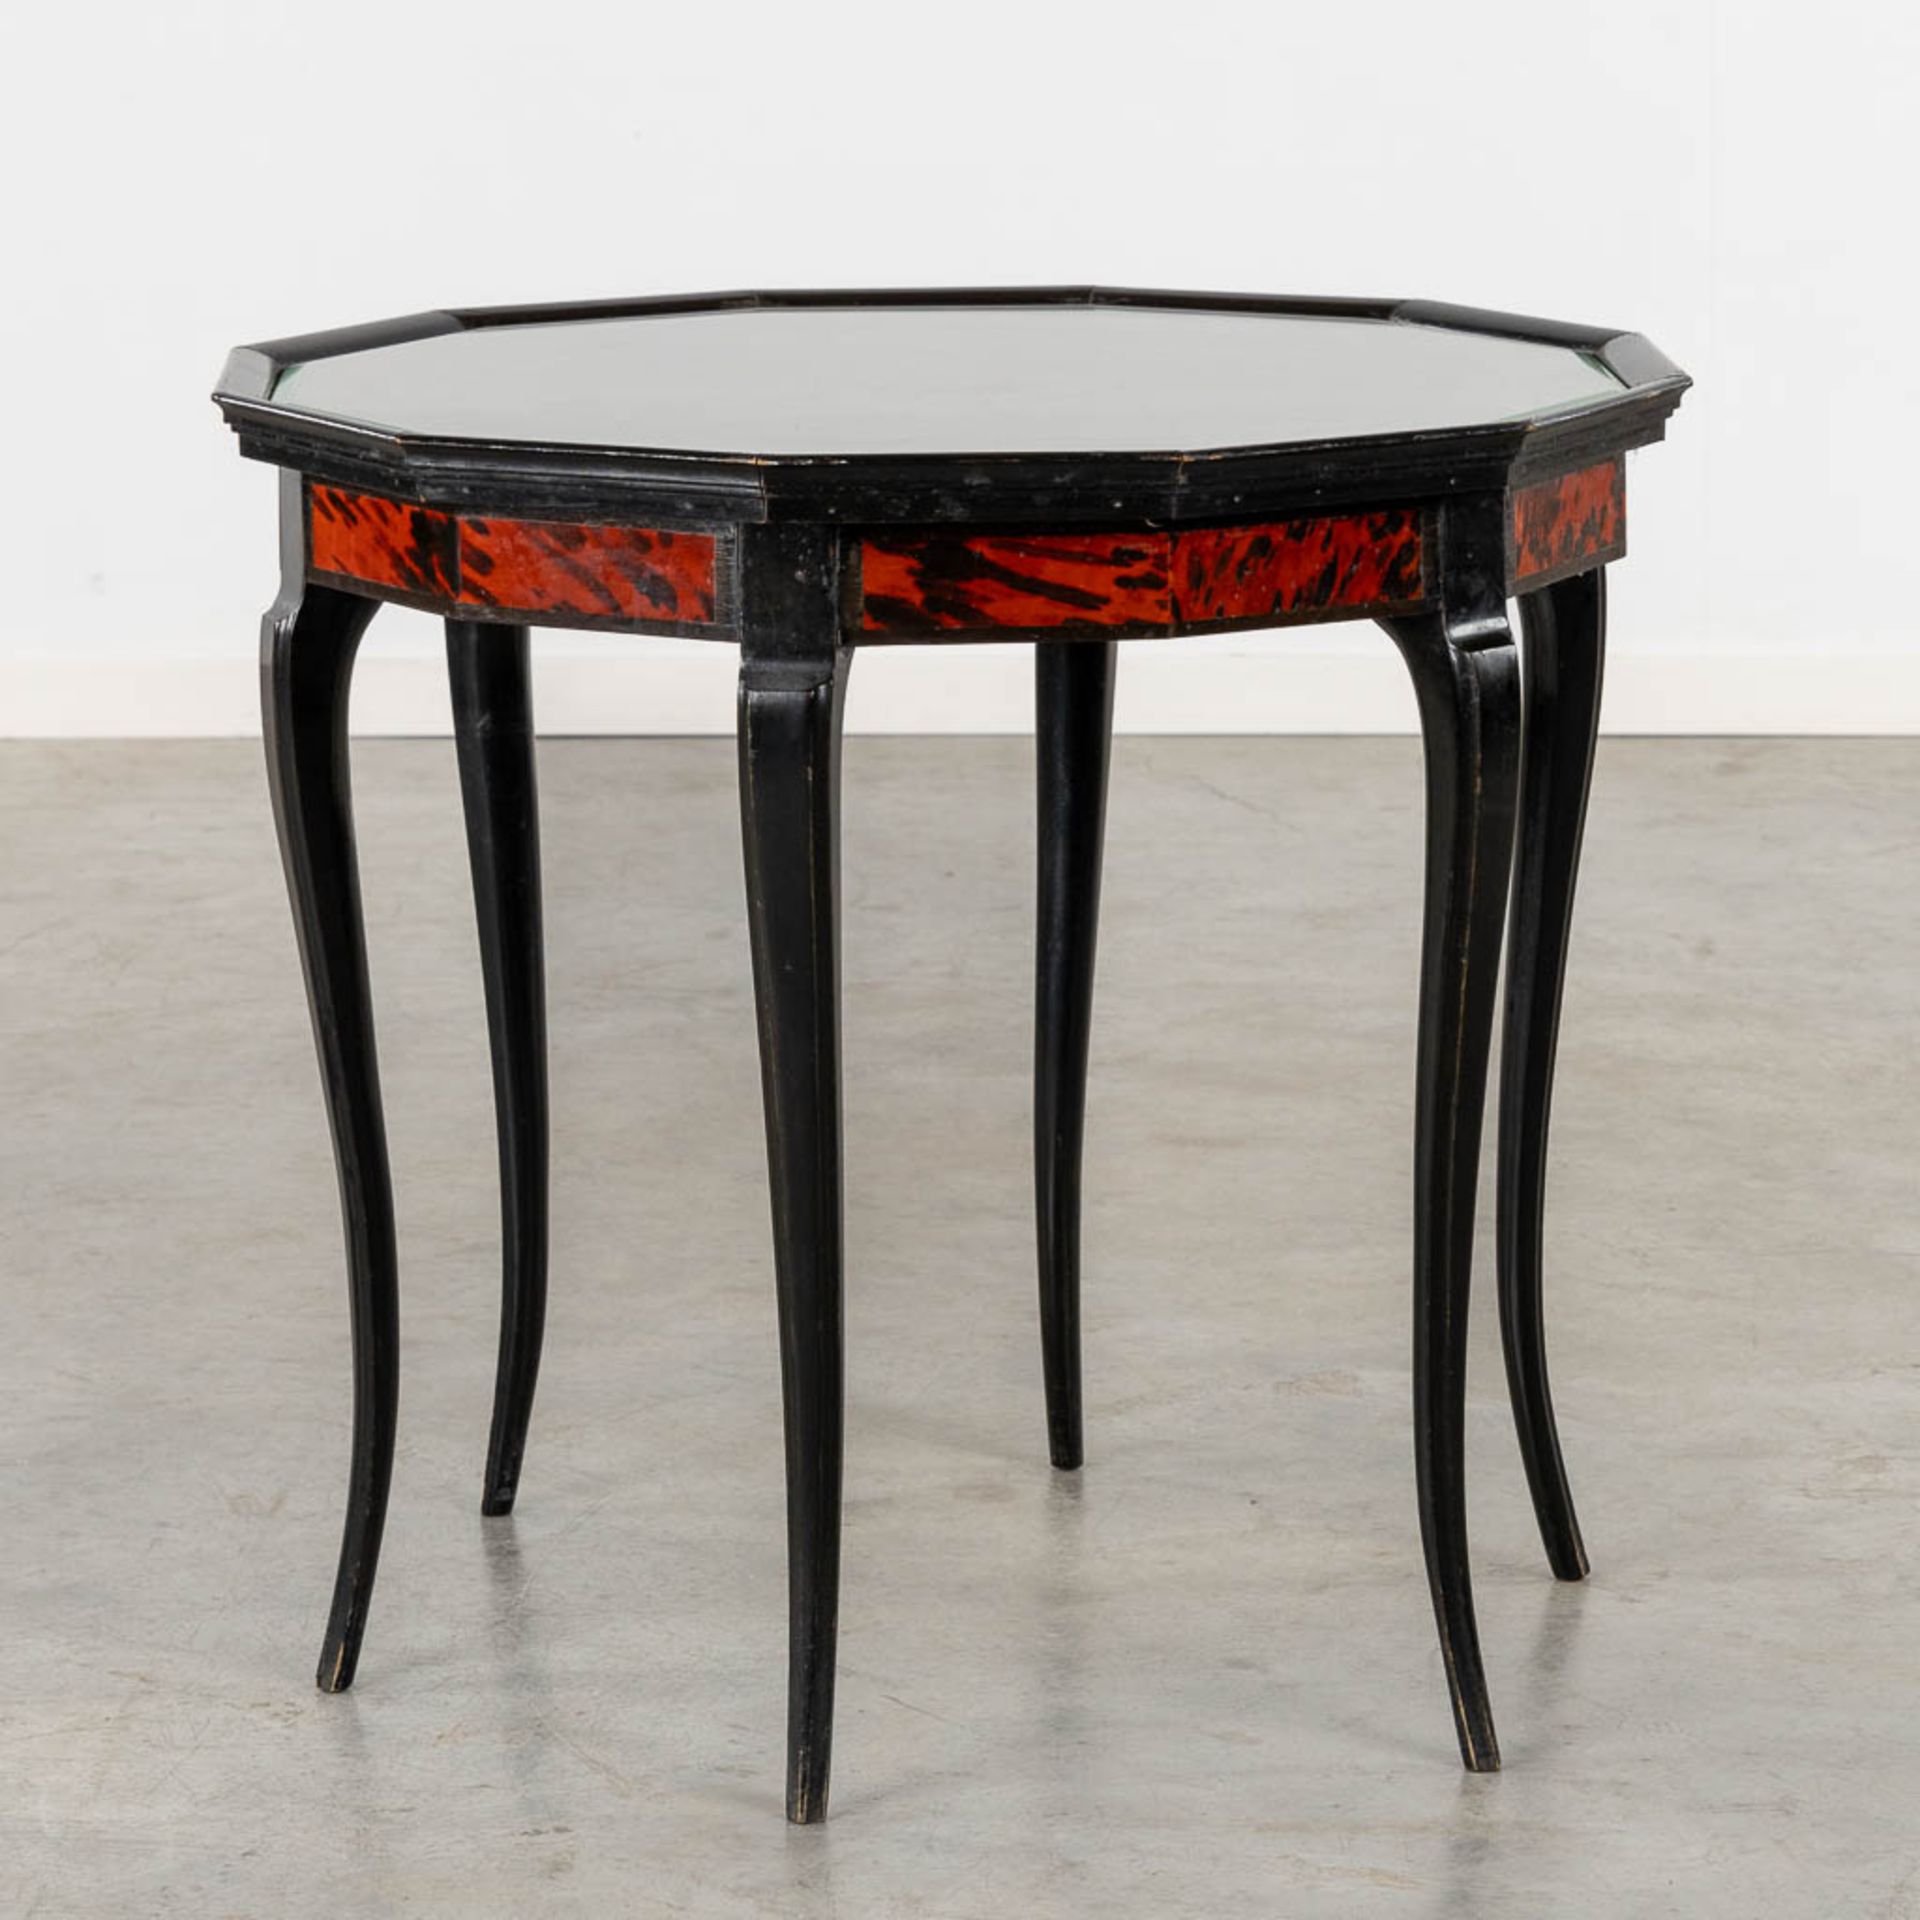 Maison Franck, Antwerp, an octagonal side table, tortoise shell and ebonised wood. (H:65 x D:72 cm) - Image 6 of 8